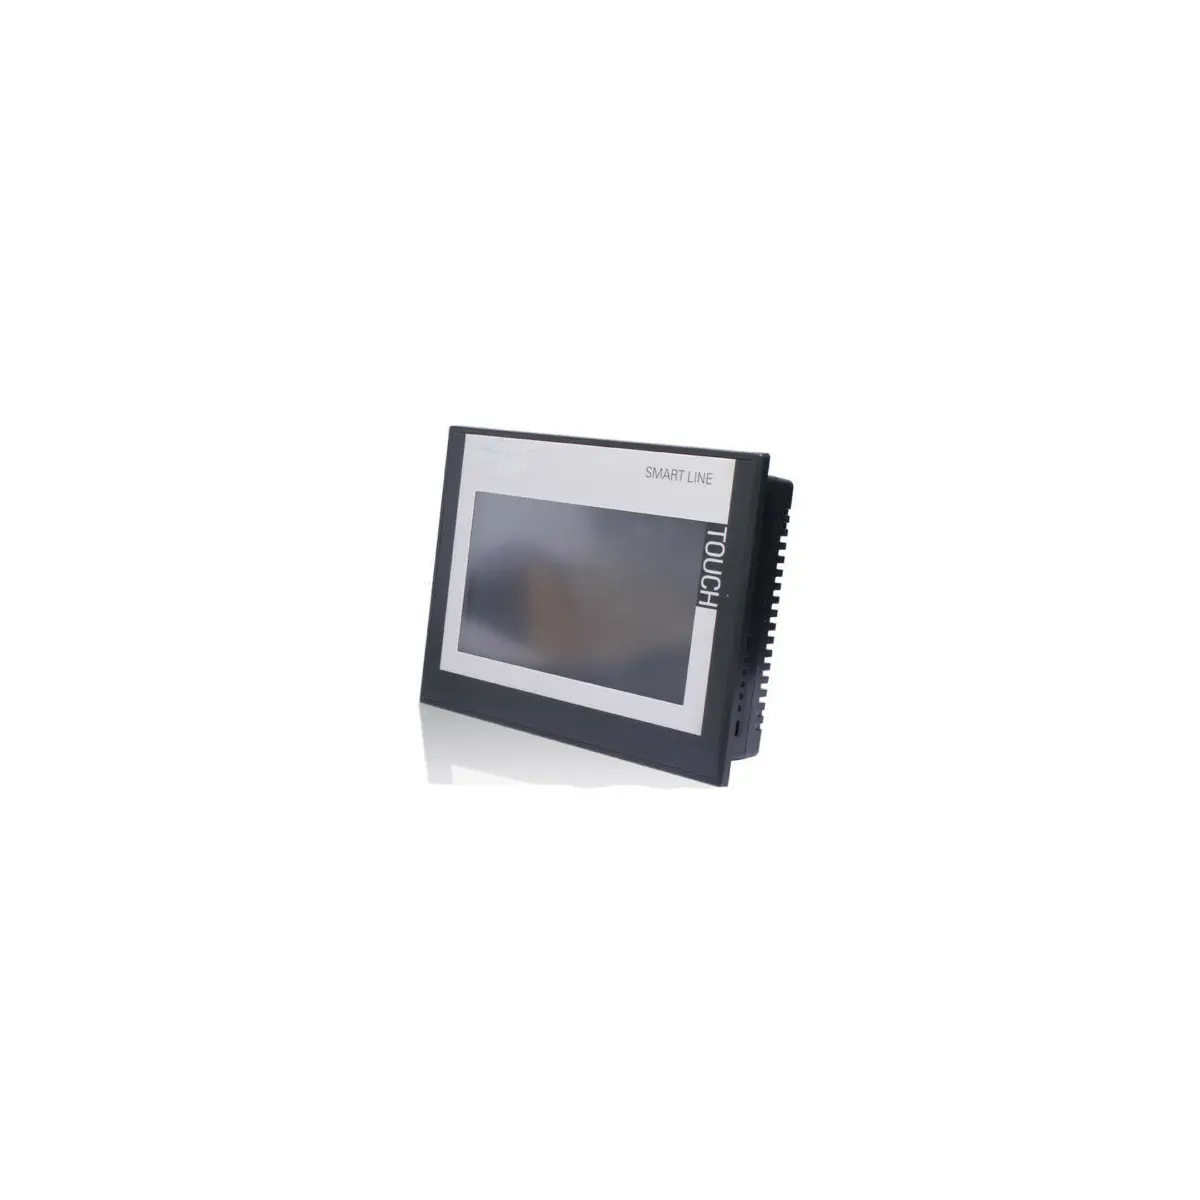 SIMATIC HMI SMART 1000 IE 6AV6648-0BE11-3AX0 Touch screen Original and authentic